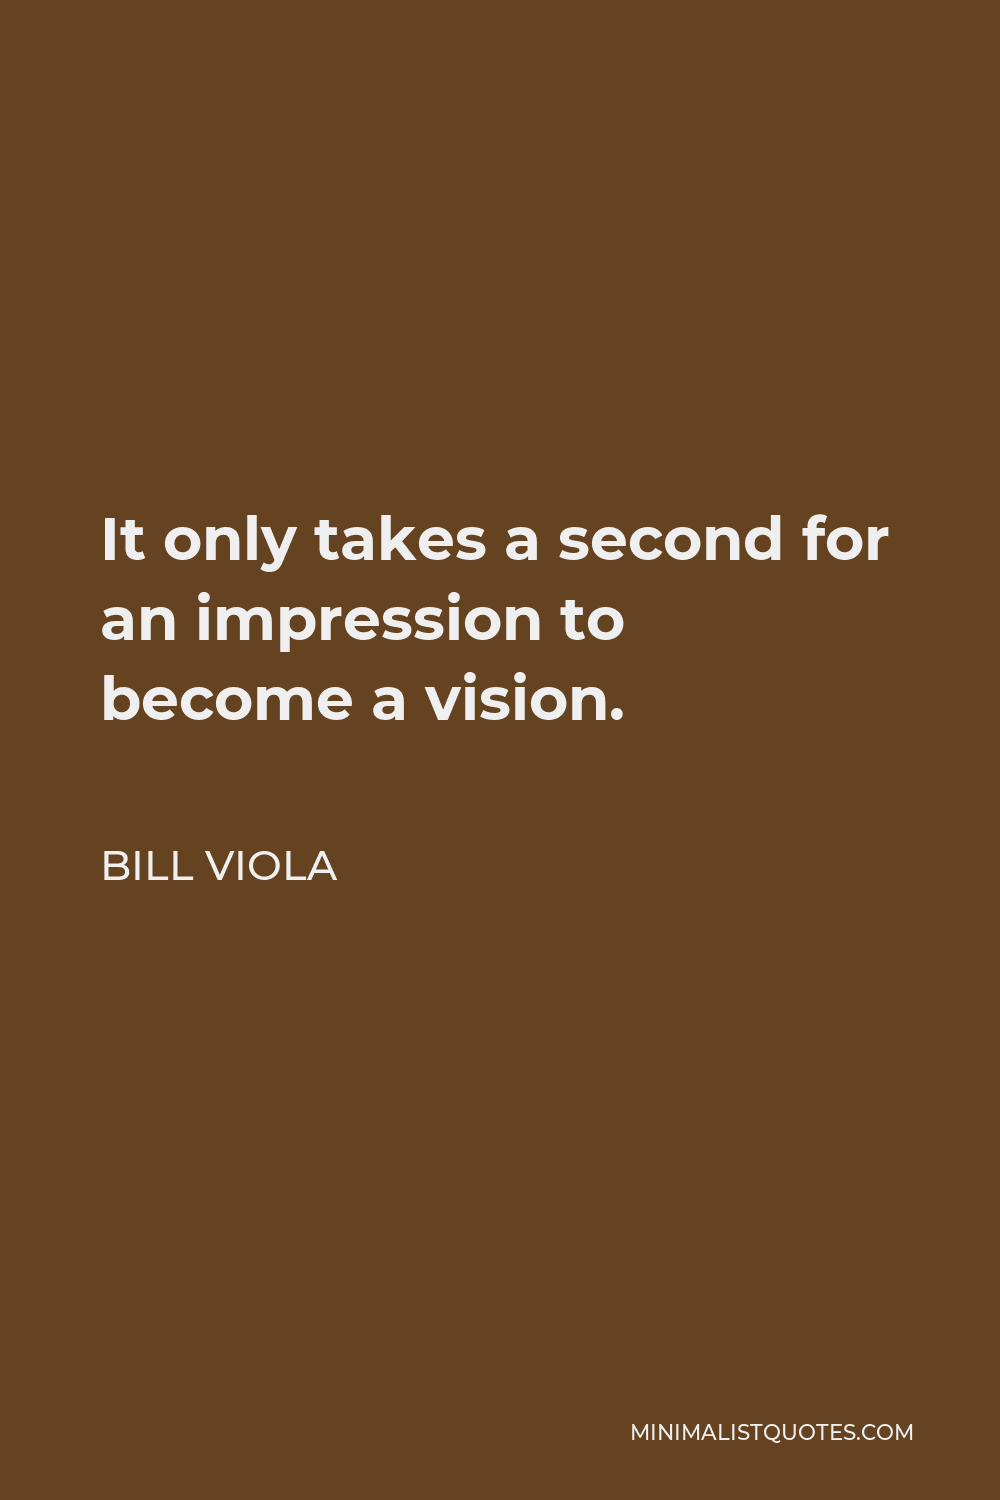 Bill Viola Quote - It only takes a second for an impression to become a vision.